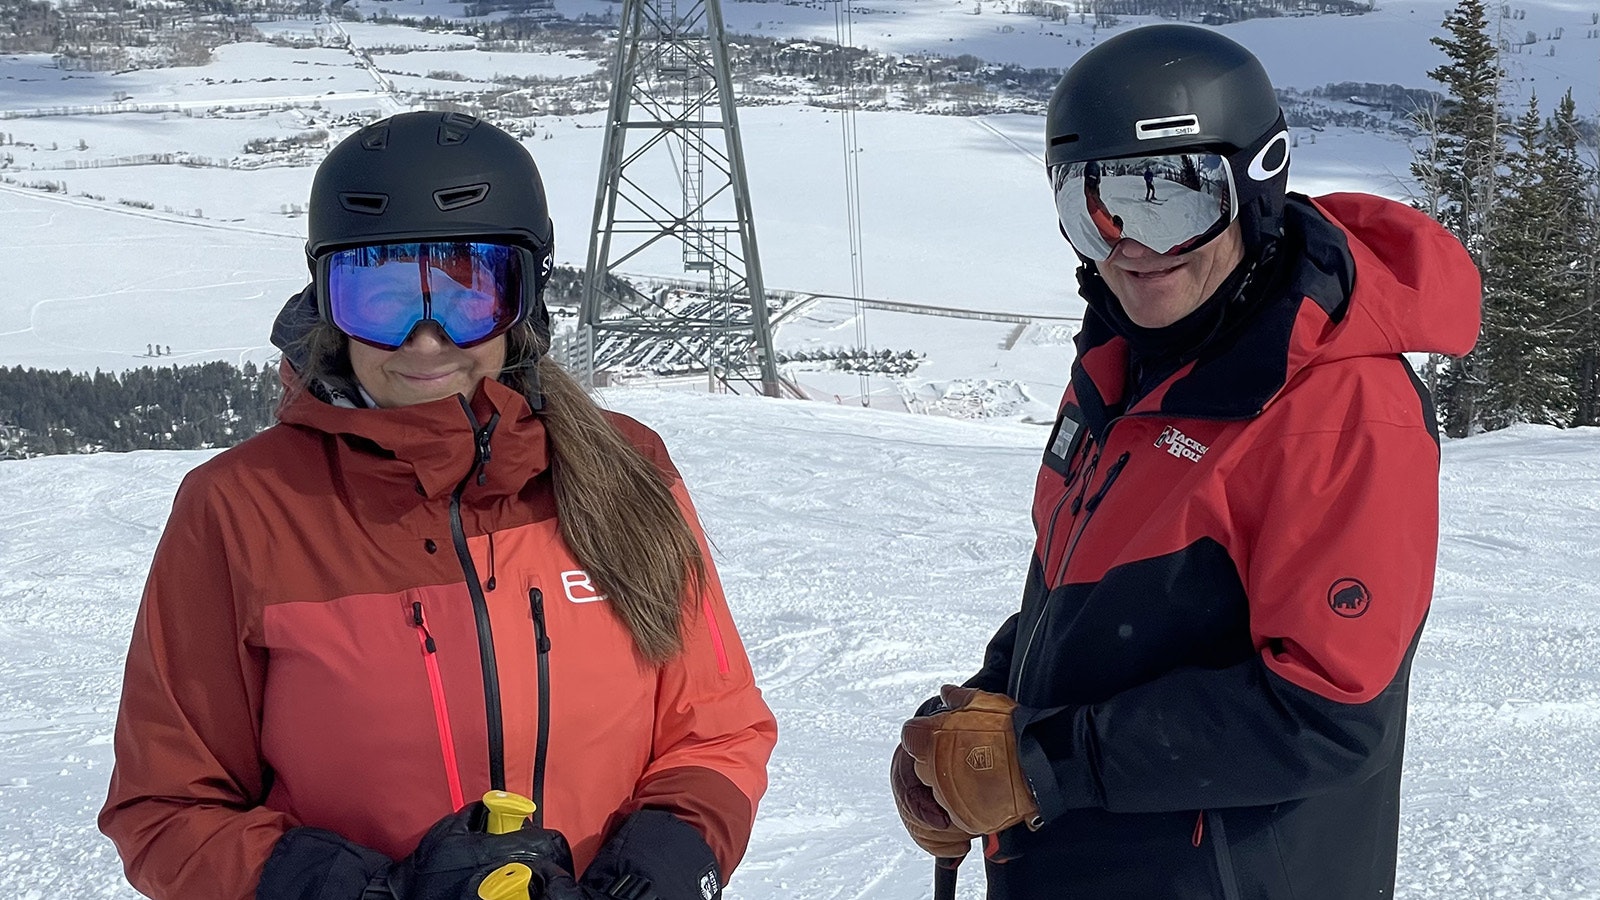 Matt McCreedy not only has a passion for the ski industry as CFO for Jackson Hole Mountain Resort for 32 years, he and wife Kari also love to ski.